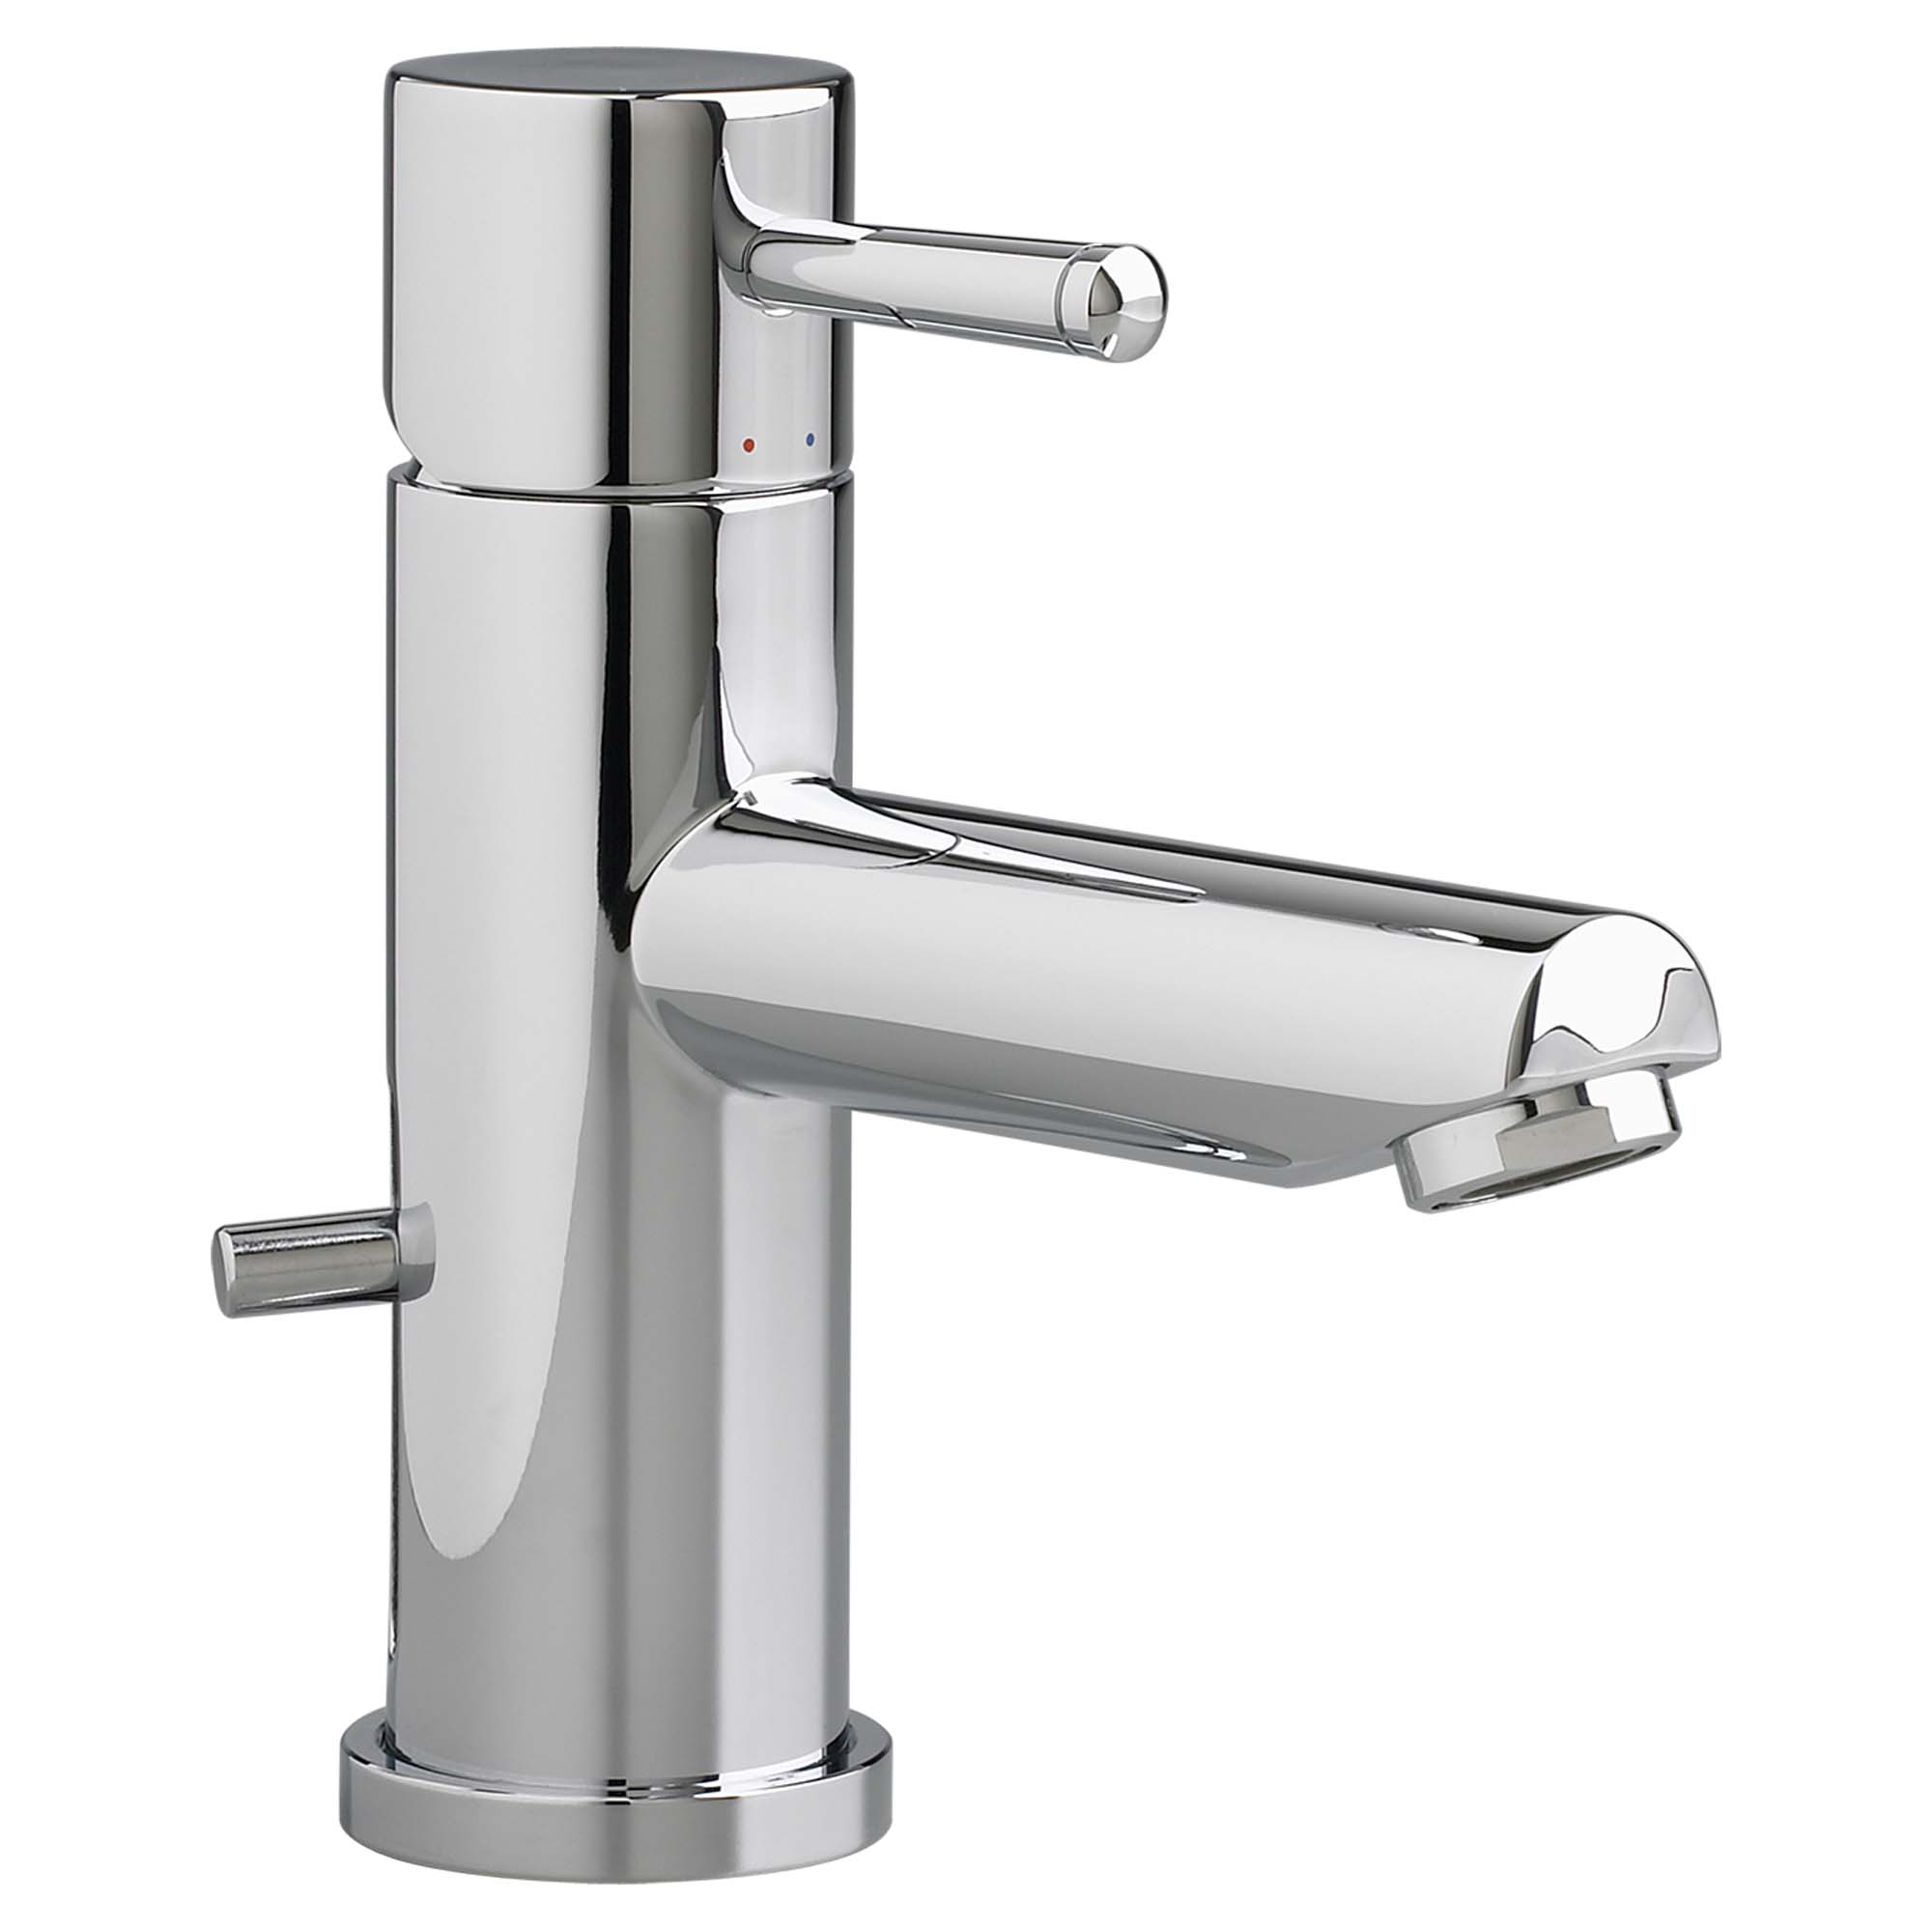 Serin™ Single Hole Single-Handle Bathroom Faucet 1.2 gpm/4.5 L/min With Lever Handle Less Drain